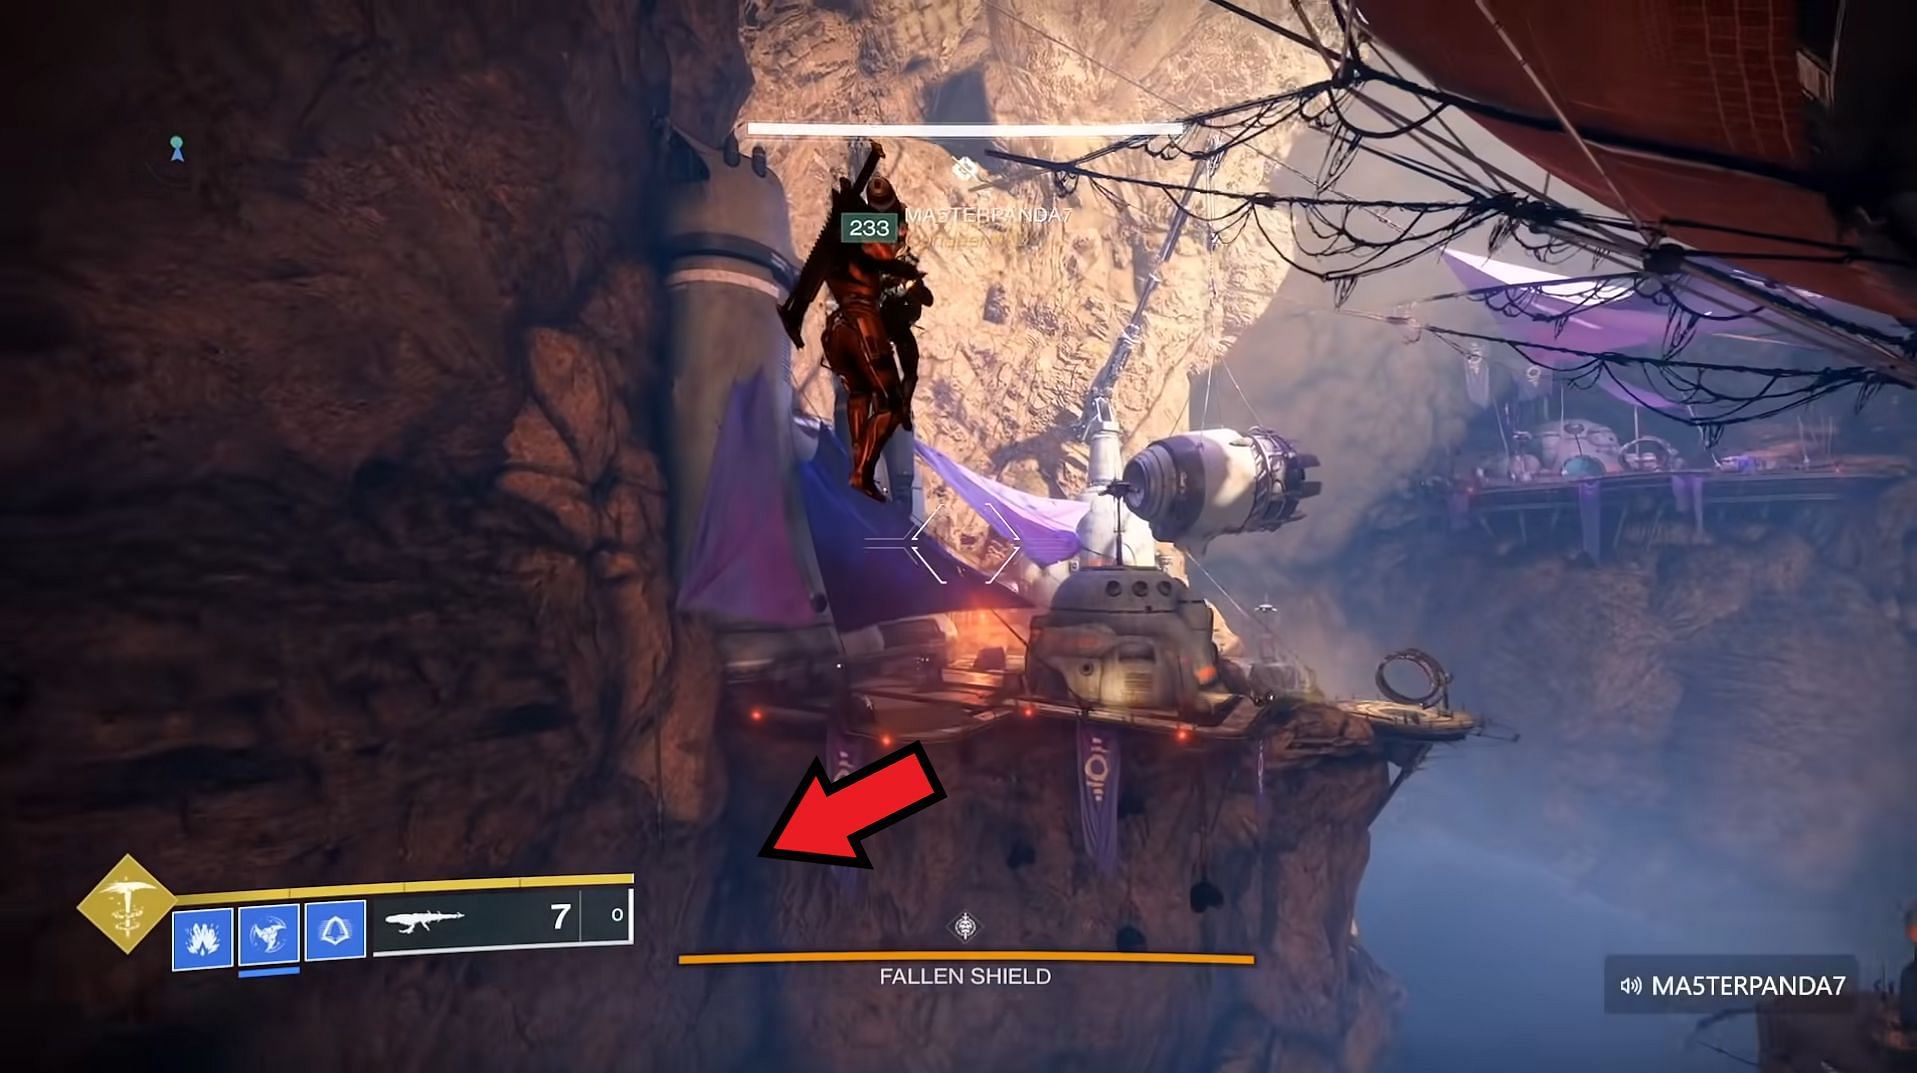 The entrance to the workaround inside Fallen Shield encounter (Image via YouTube/Cheese Forever)